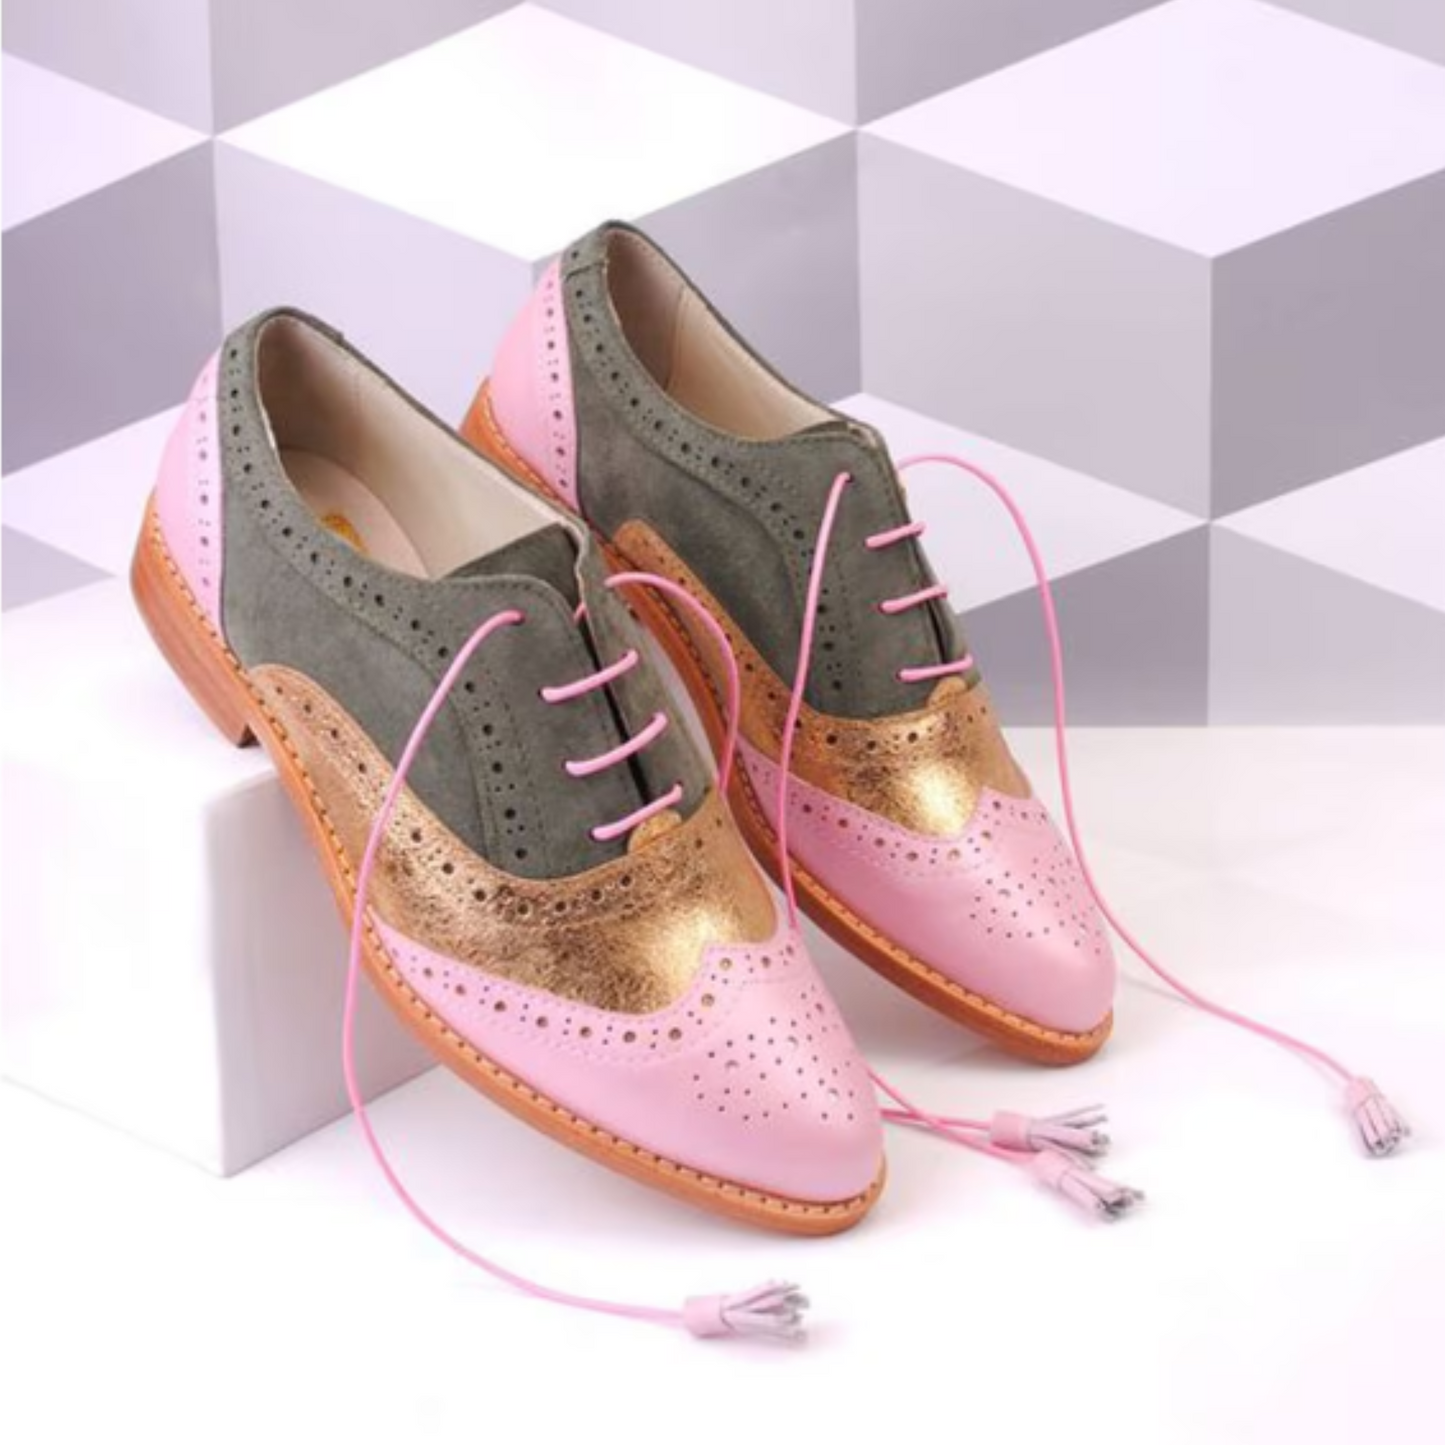 Bespoke Women's Grey, Gold and Pink Leather Oxford Wingtip Lace up Dress Shoes